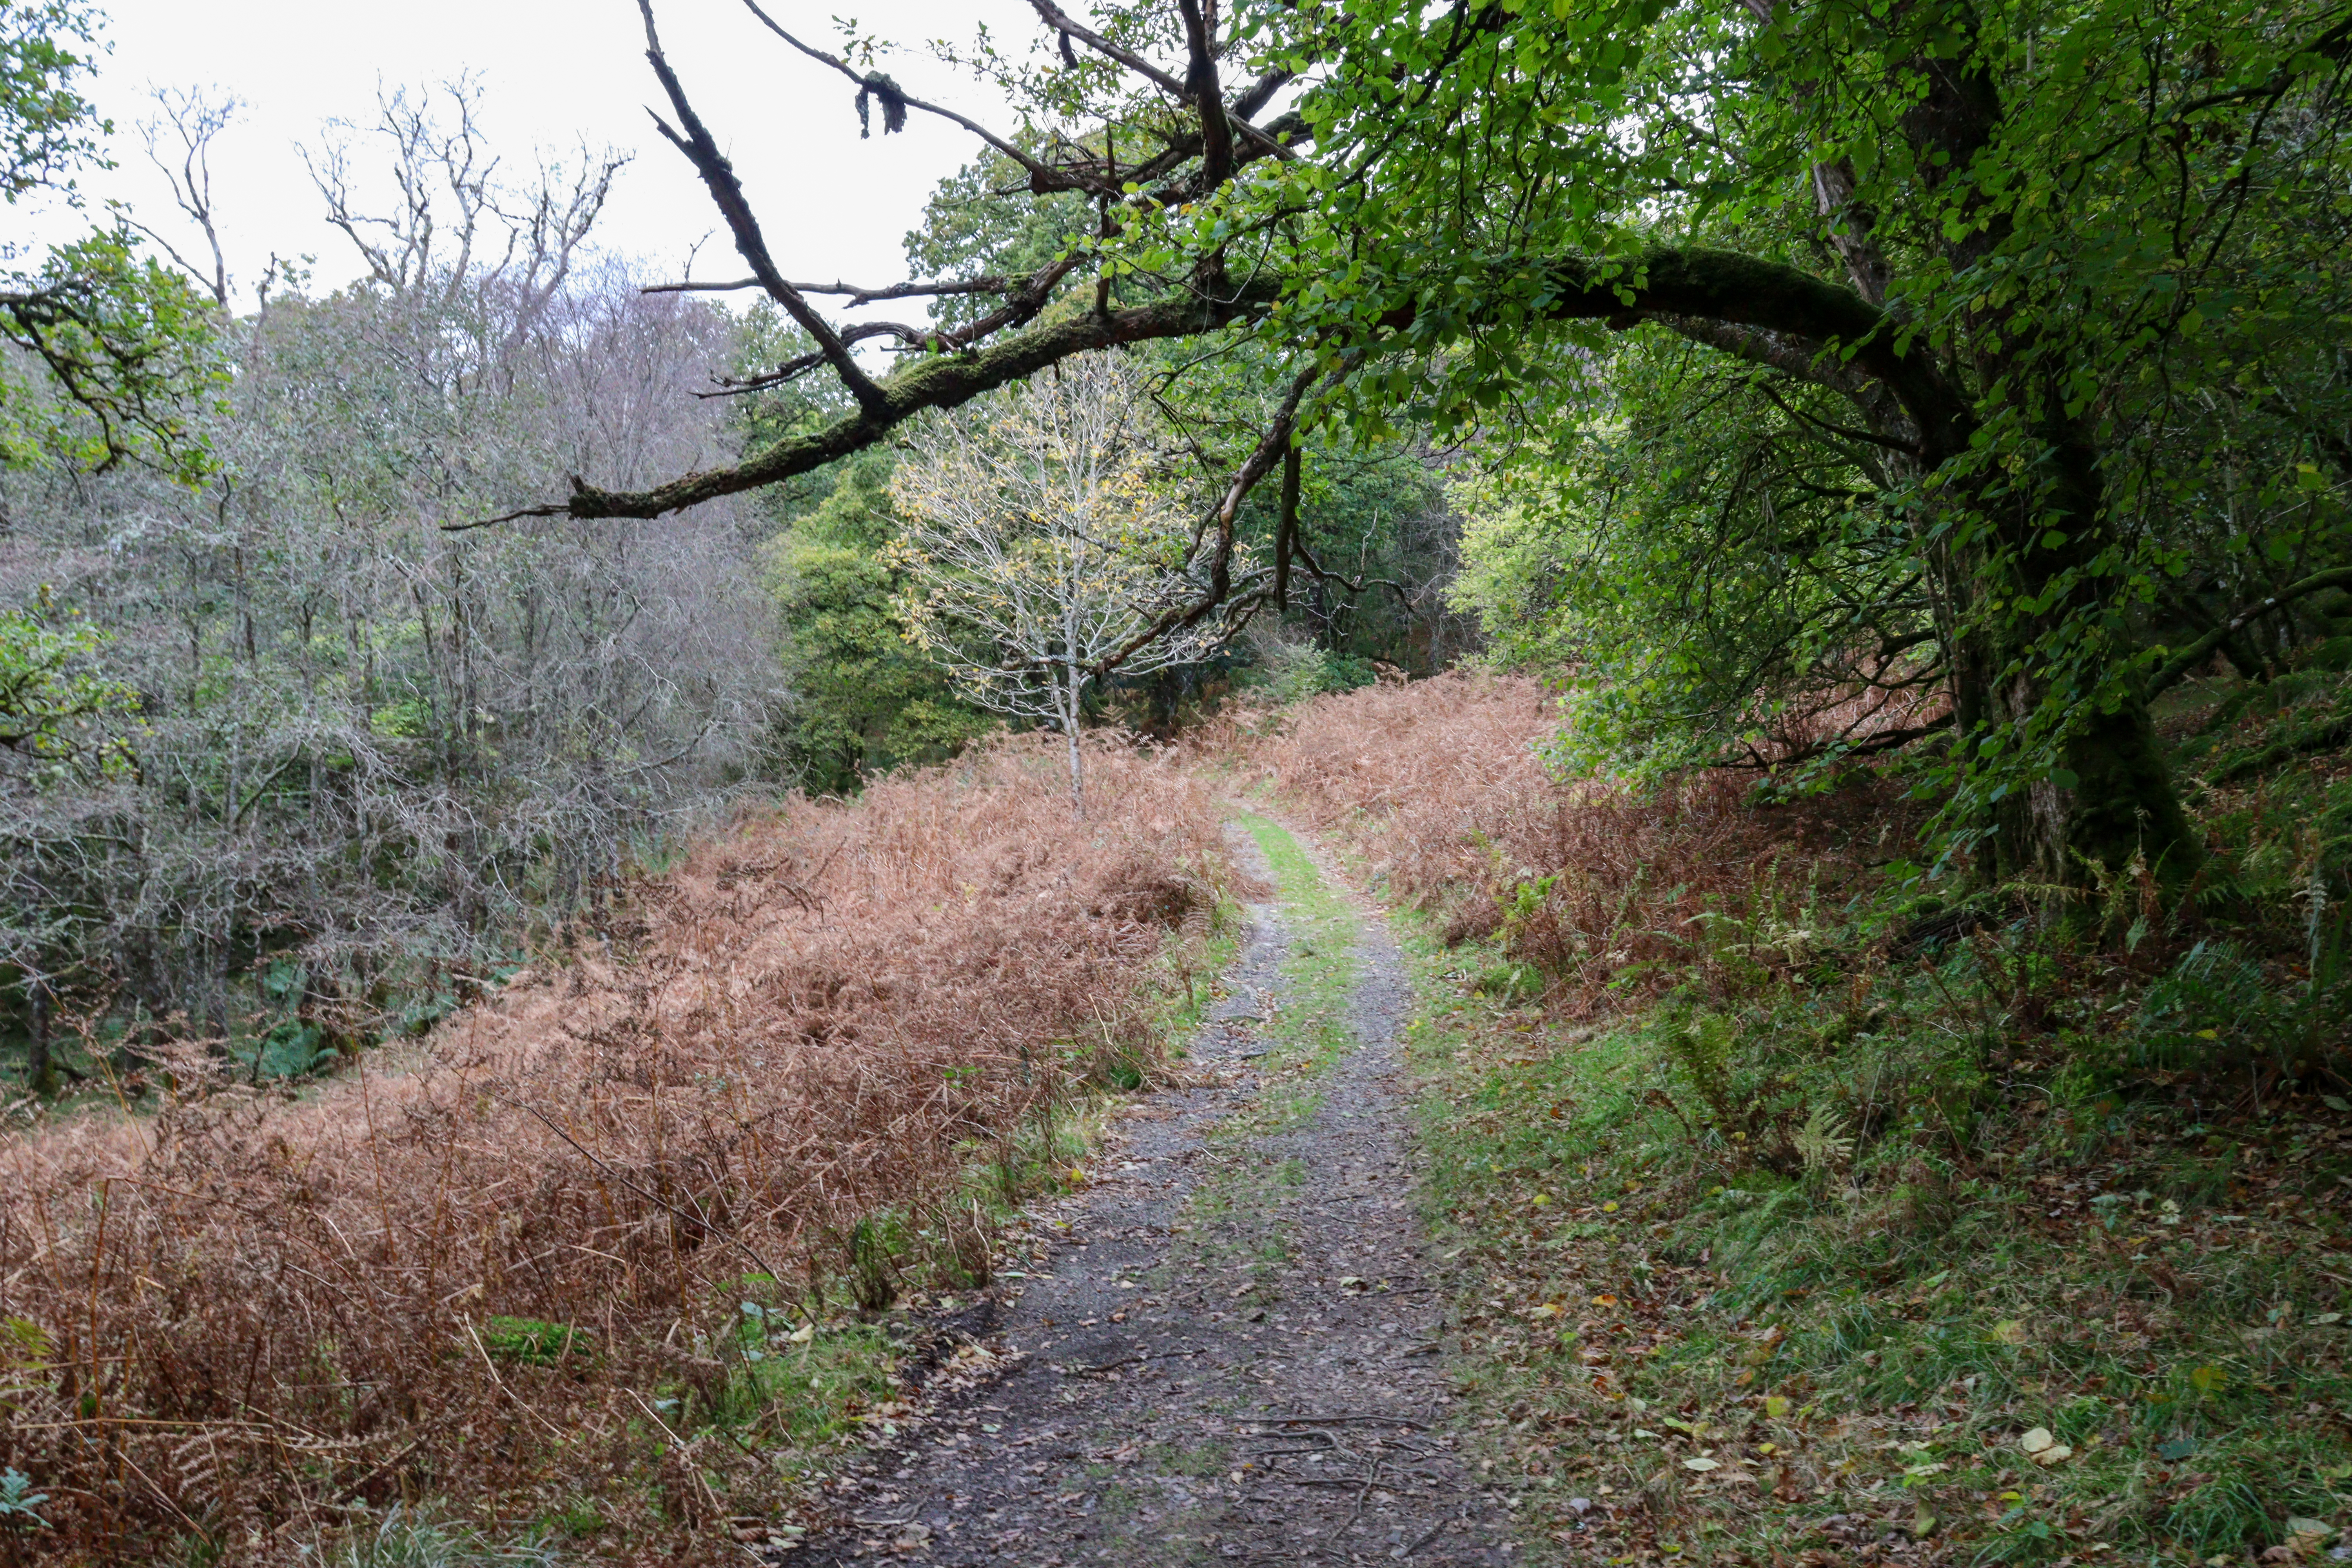 Woodland path with autumnal trees and brown undergrowth.